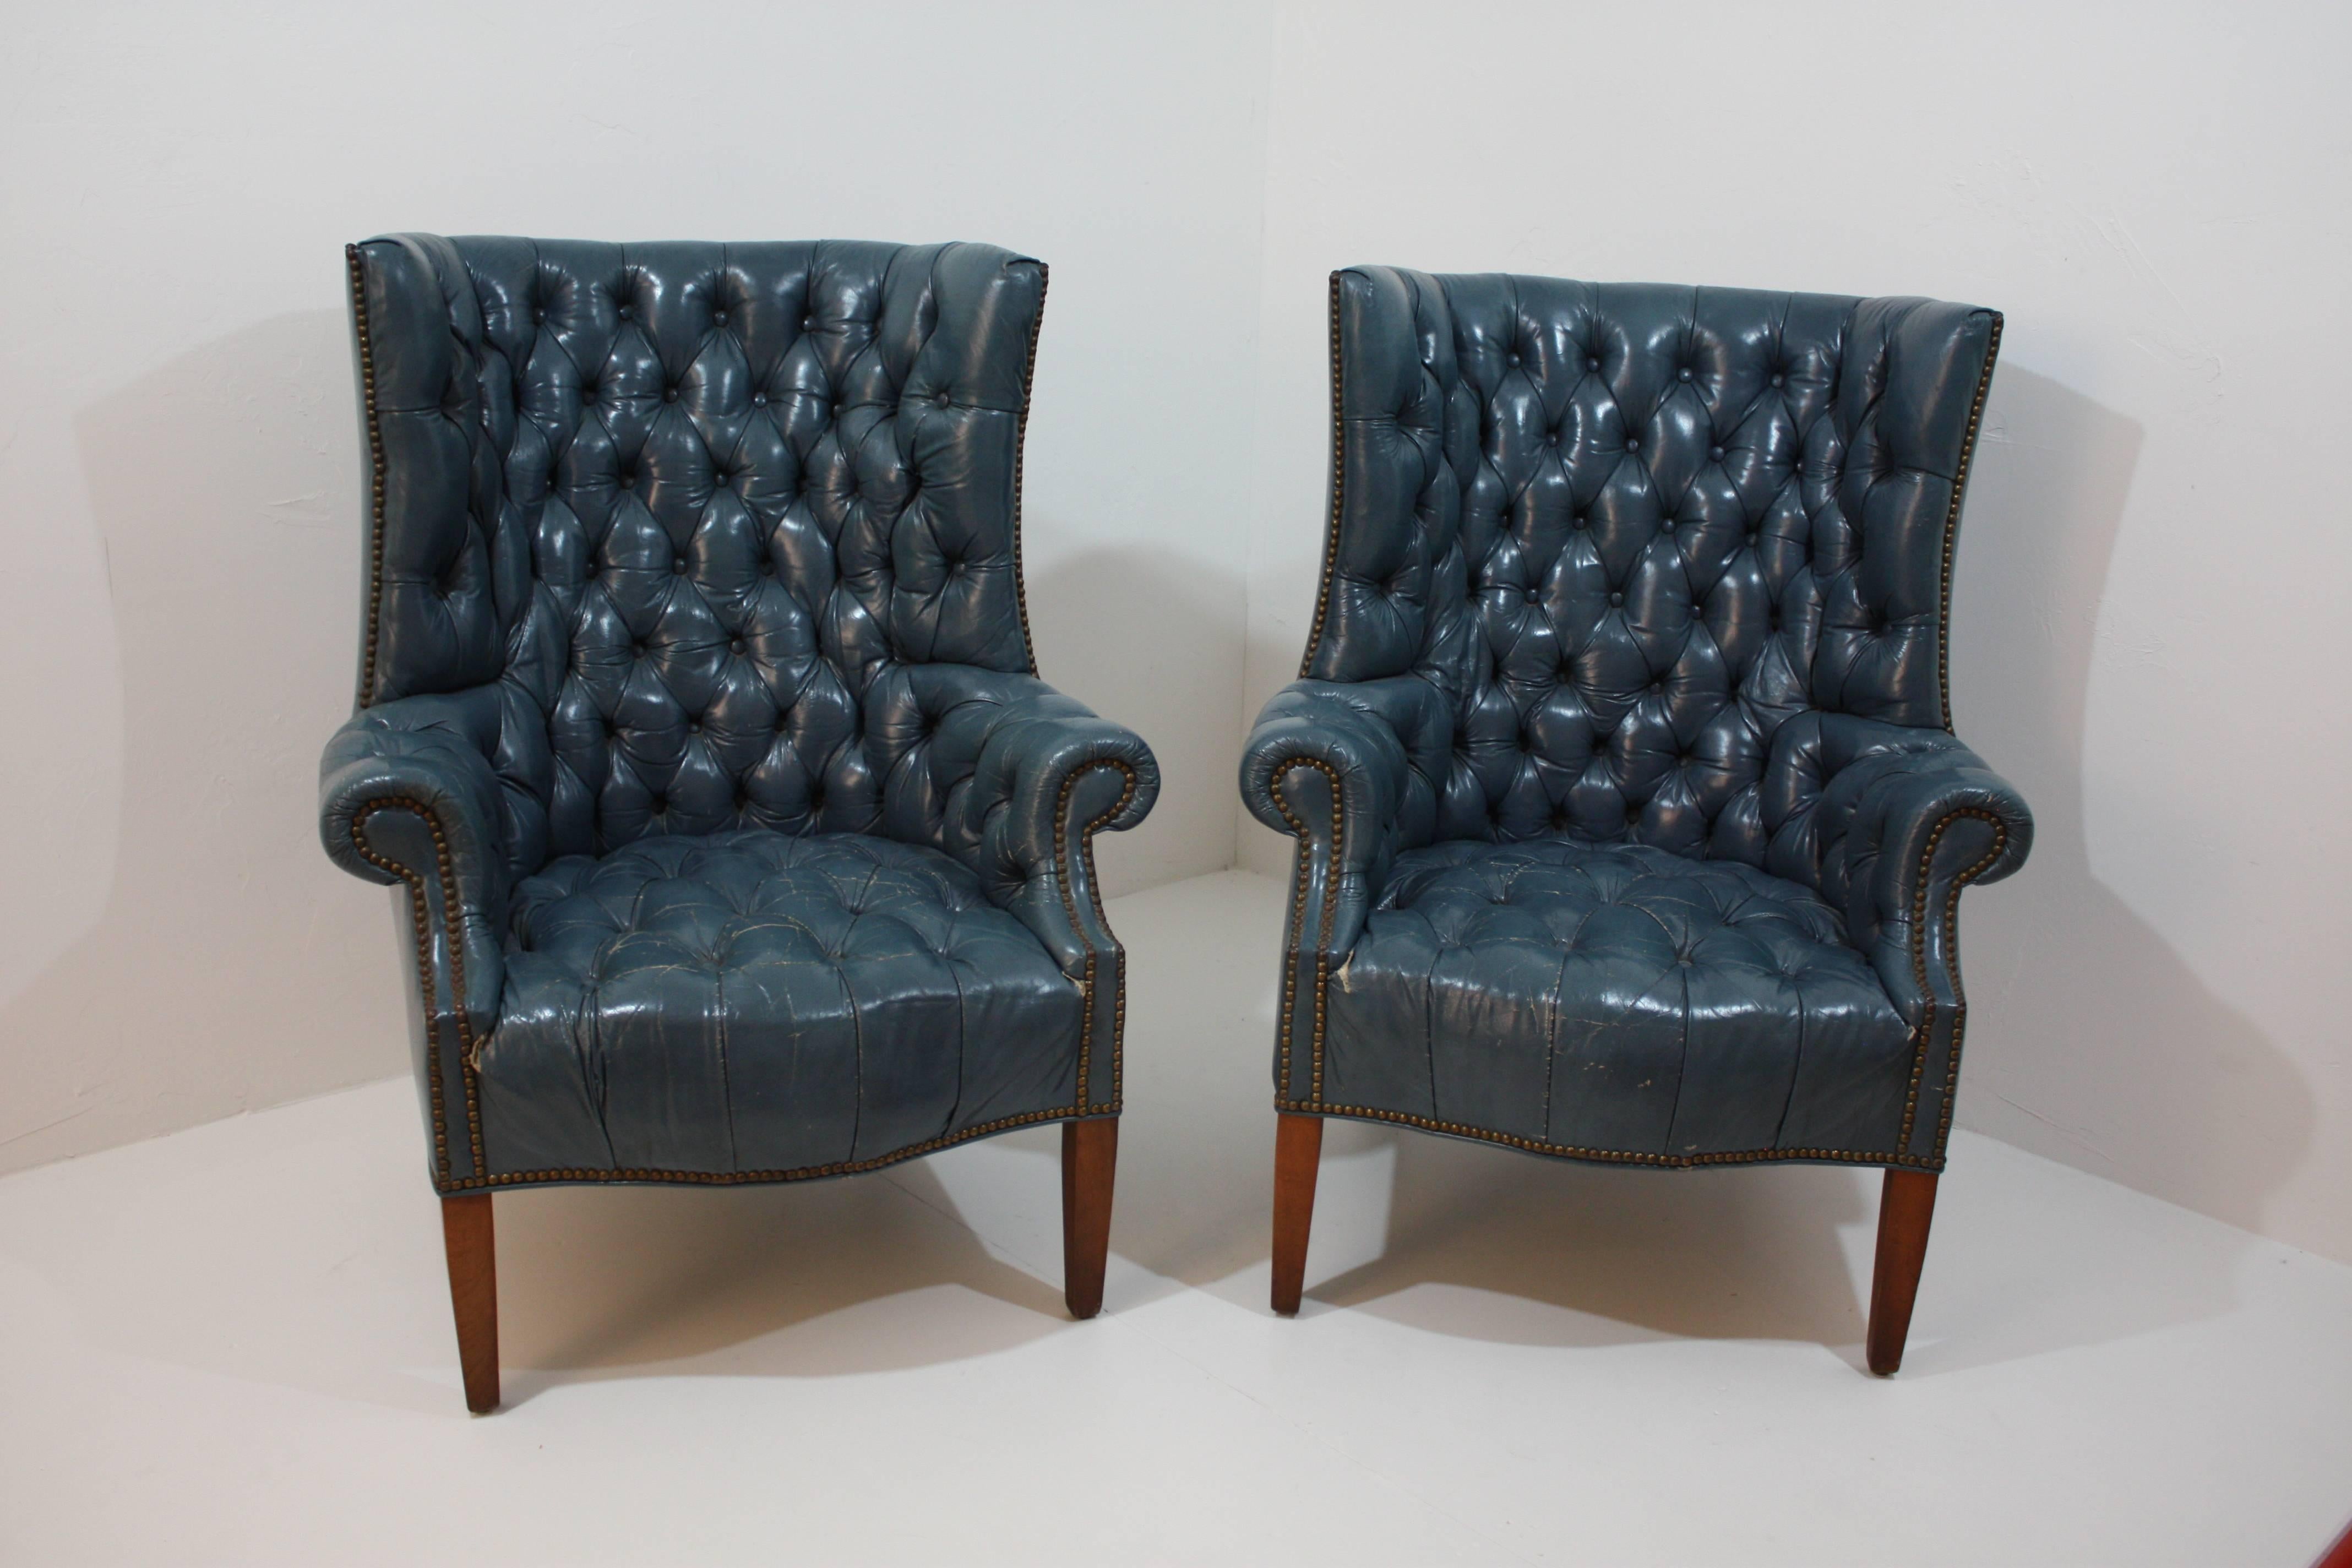  Leather Tufted Curved Back Chairs 1